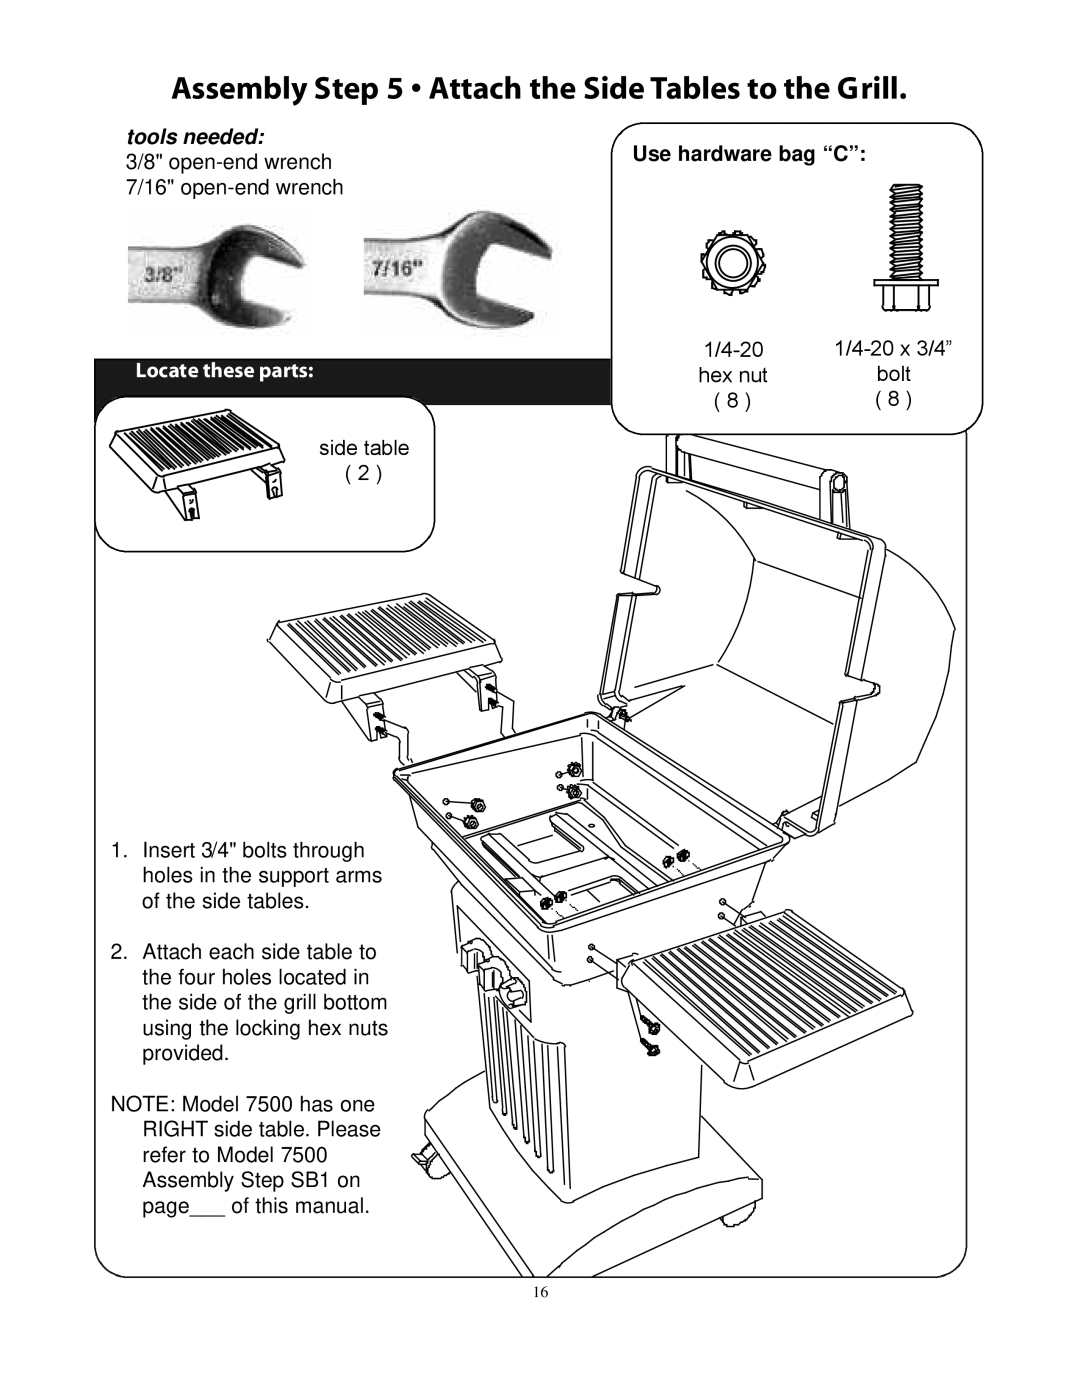 CFM Corporation 7000 owner manual Assembly Attach the Side Tables to the Grill 